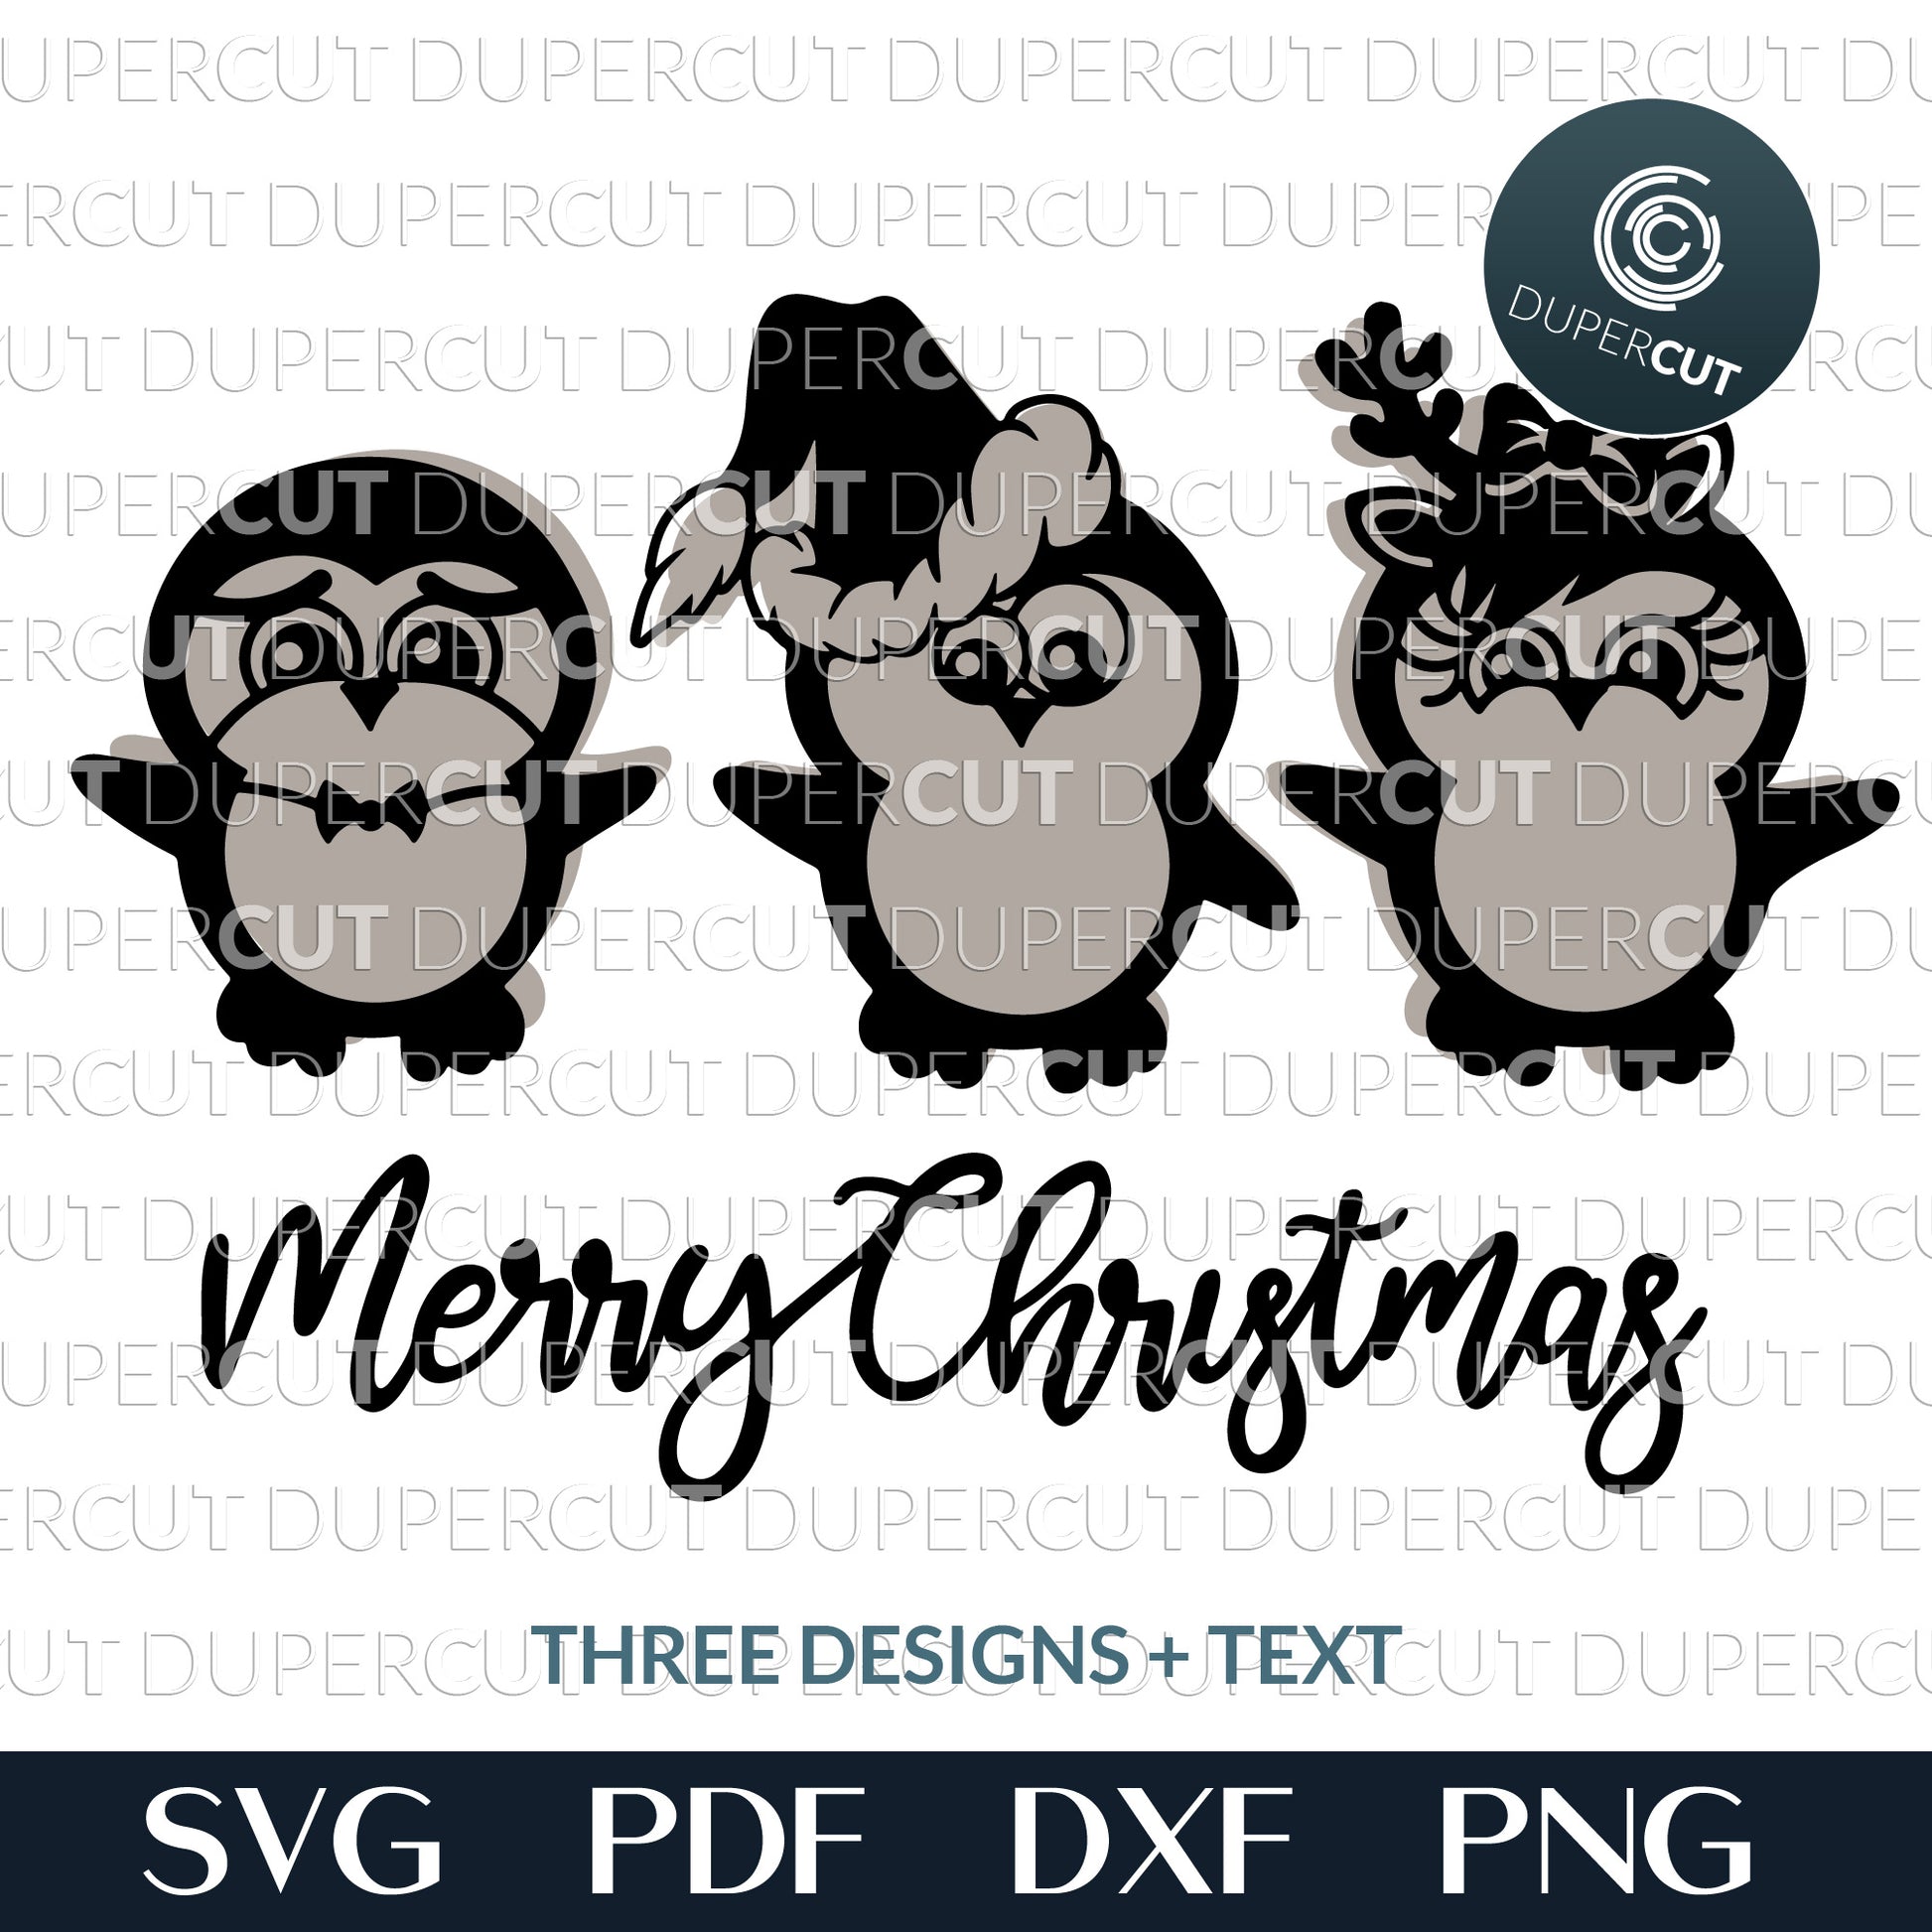 Holiday penguins ornaments - SVG PDF DXF dual layer cutting files for laser and digital machines, Glowforge, Cricut, Silhouette, CNC plasma